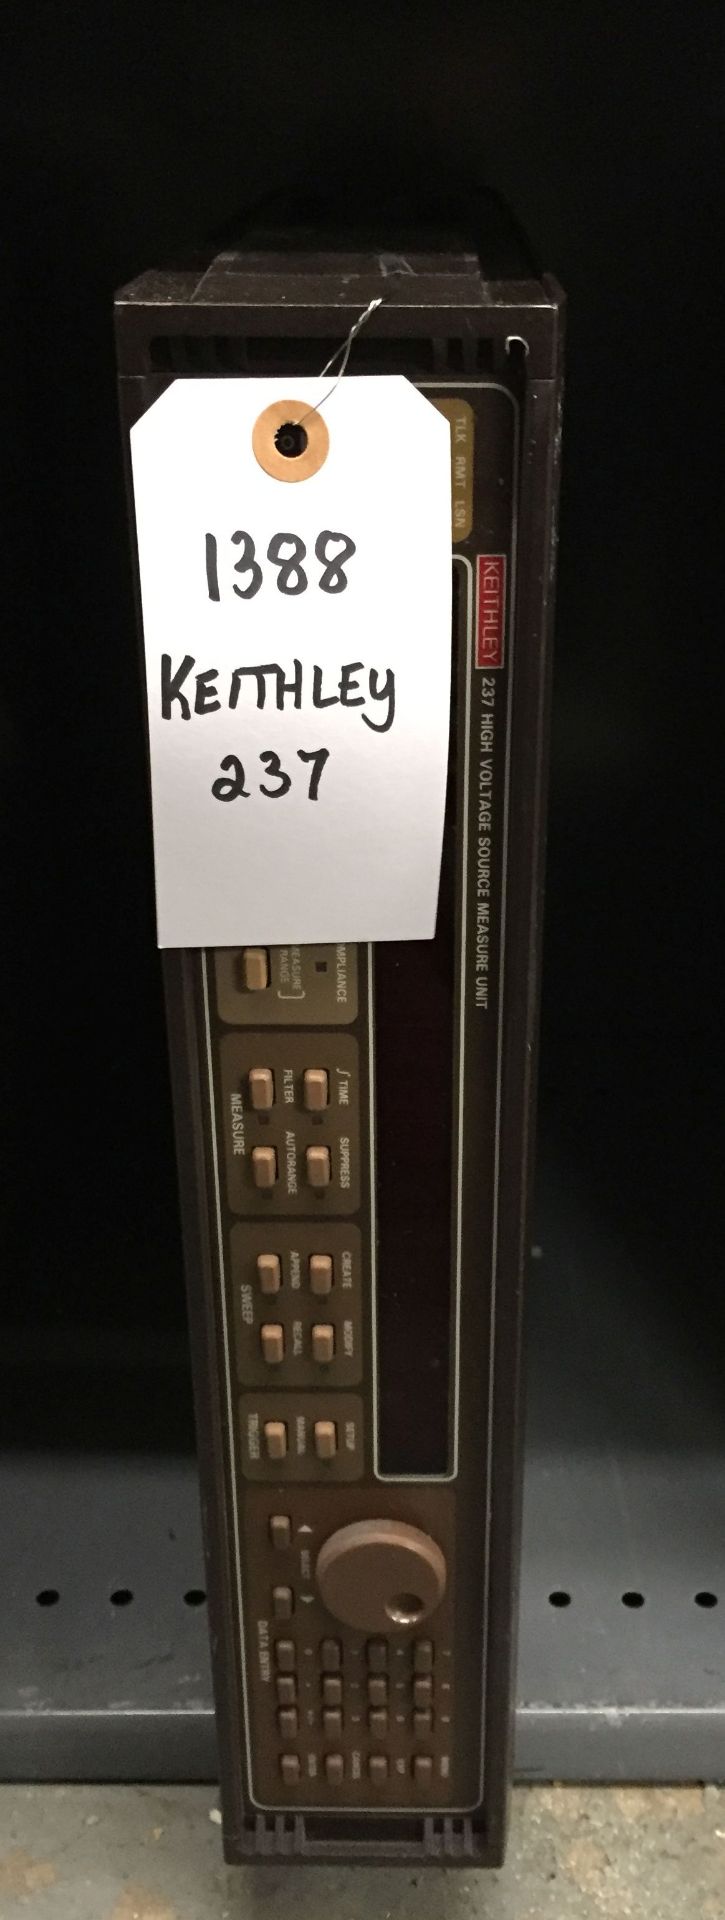 Keithley 237 High Voltage Source Measure Unit